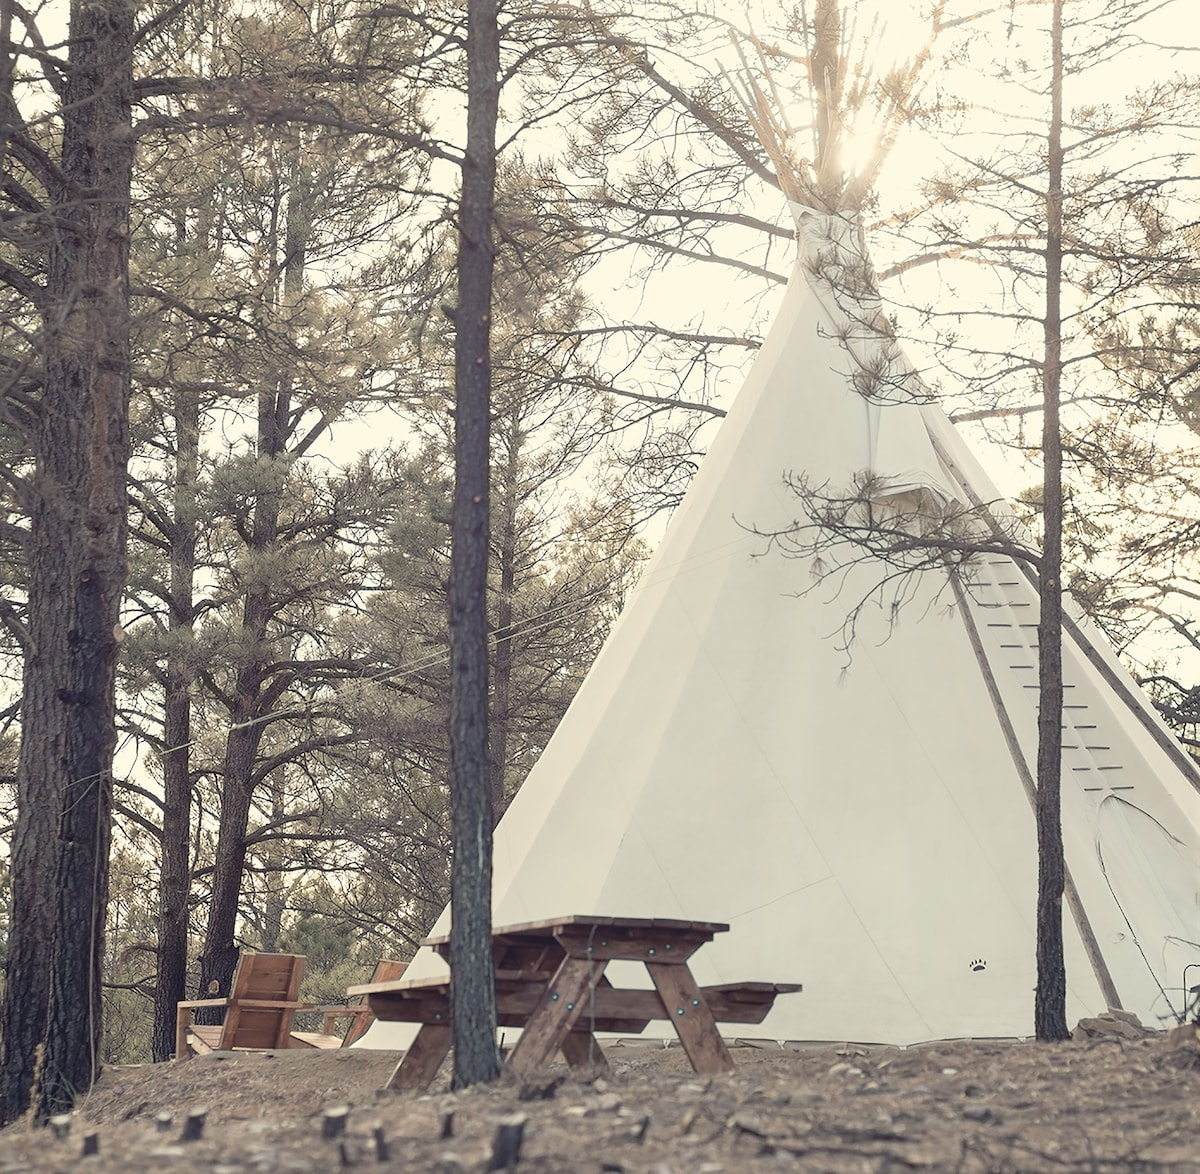 The Hiding Place
A Tipi glamping retreat